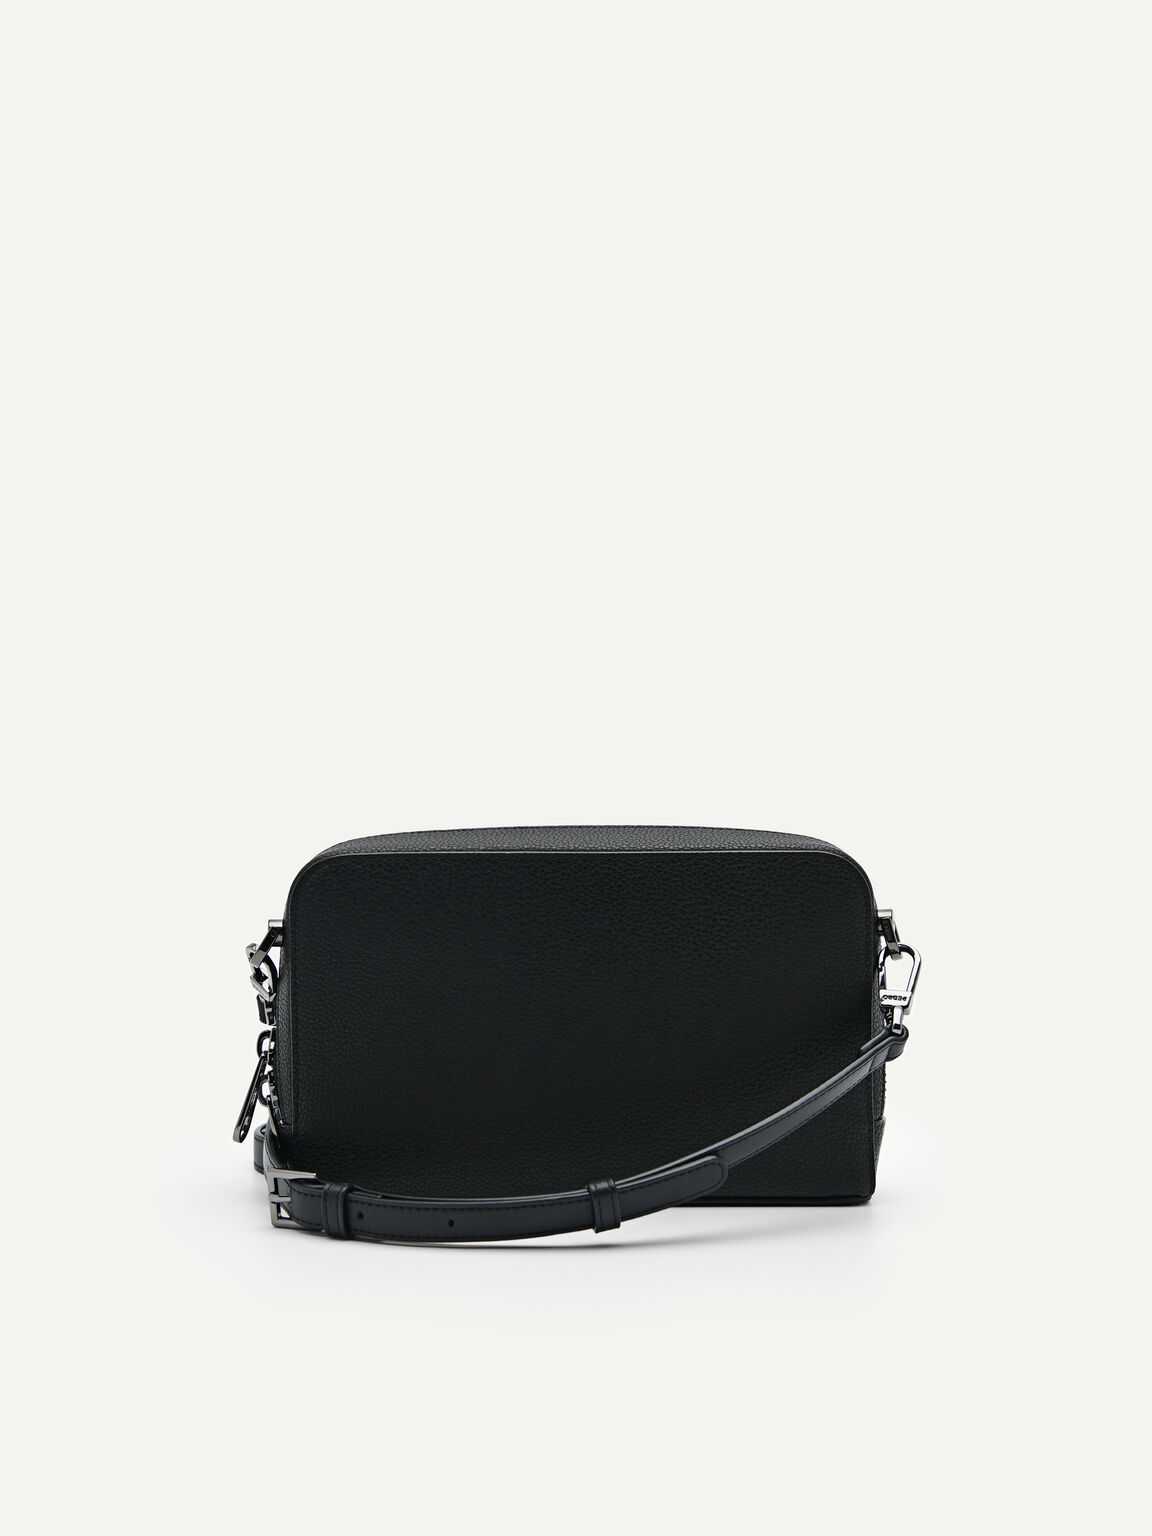 Embossed Leather Sling Pouch, Black, hi-res